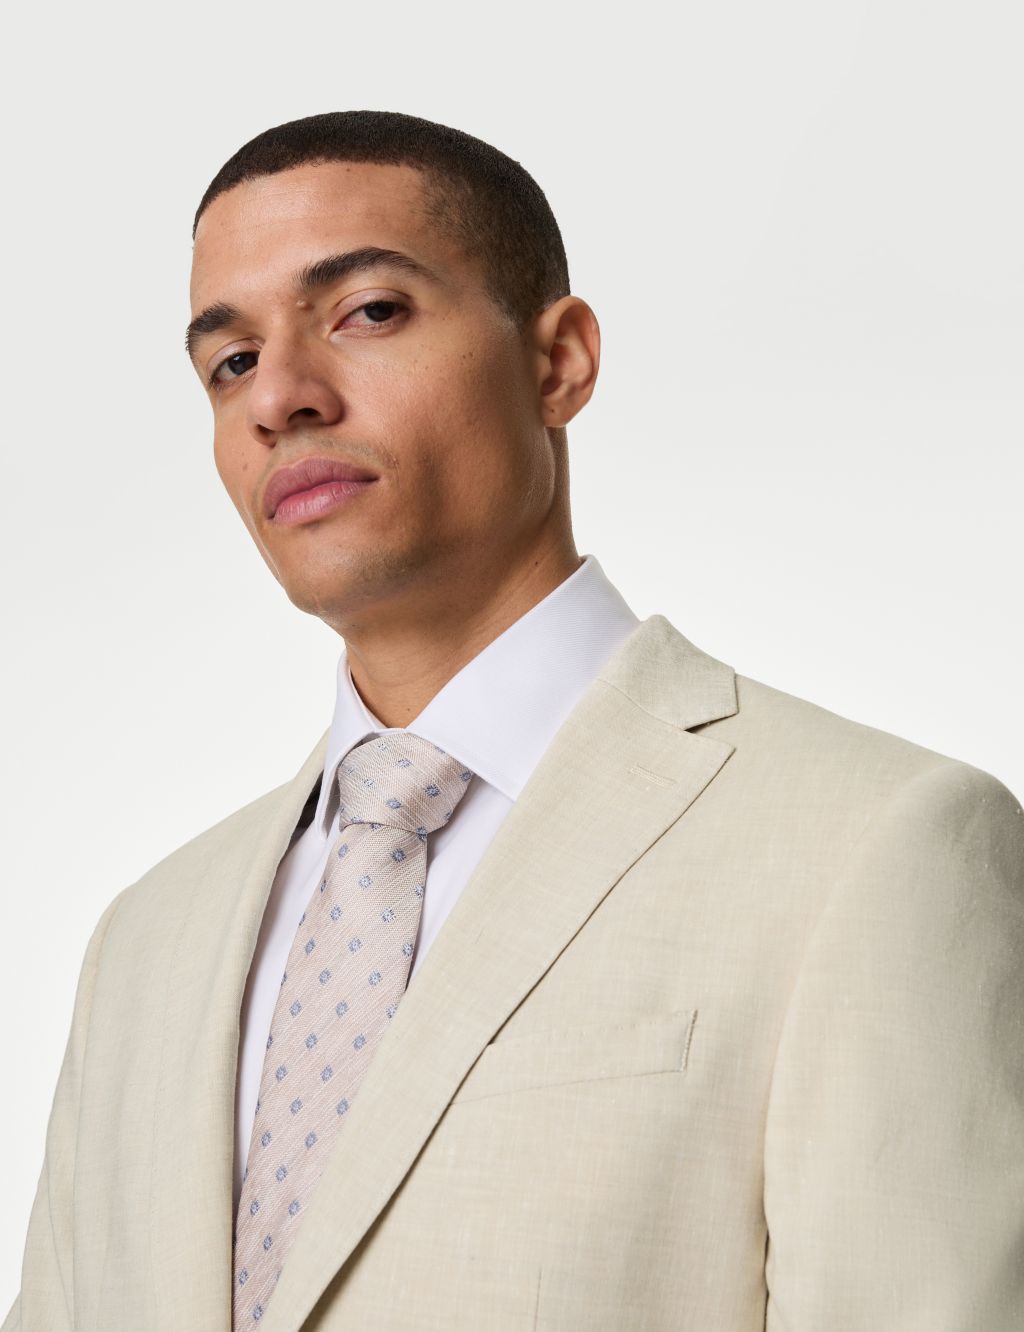 Tailored Fit Italian Linen Miracle™ Suit Jacket image 4